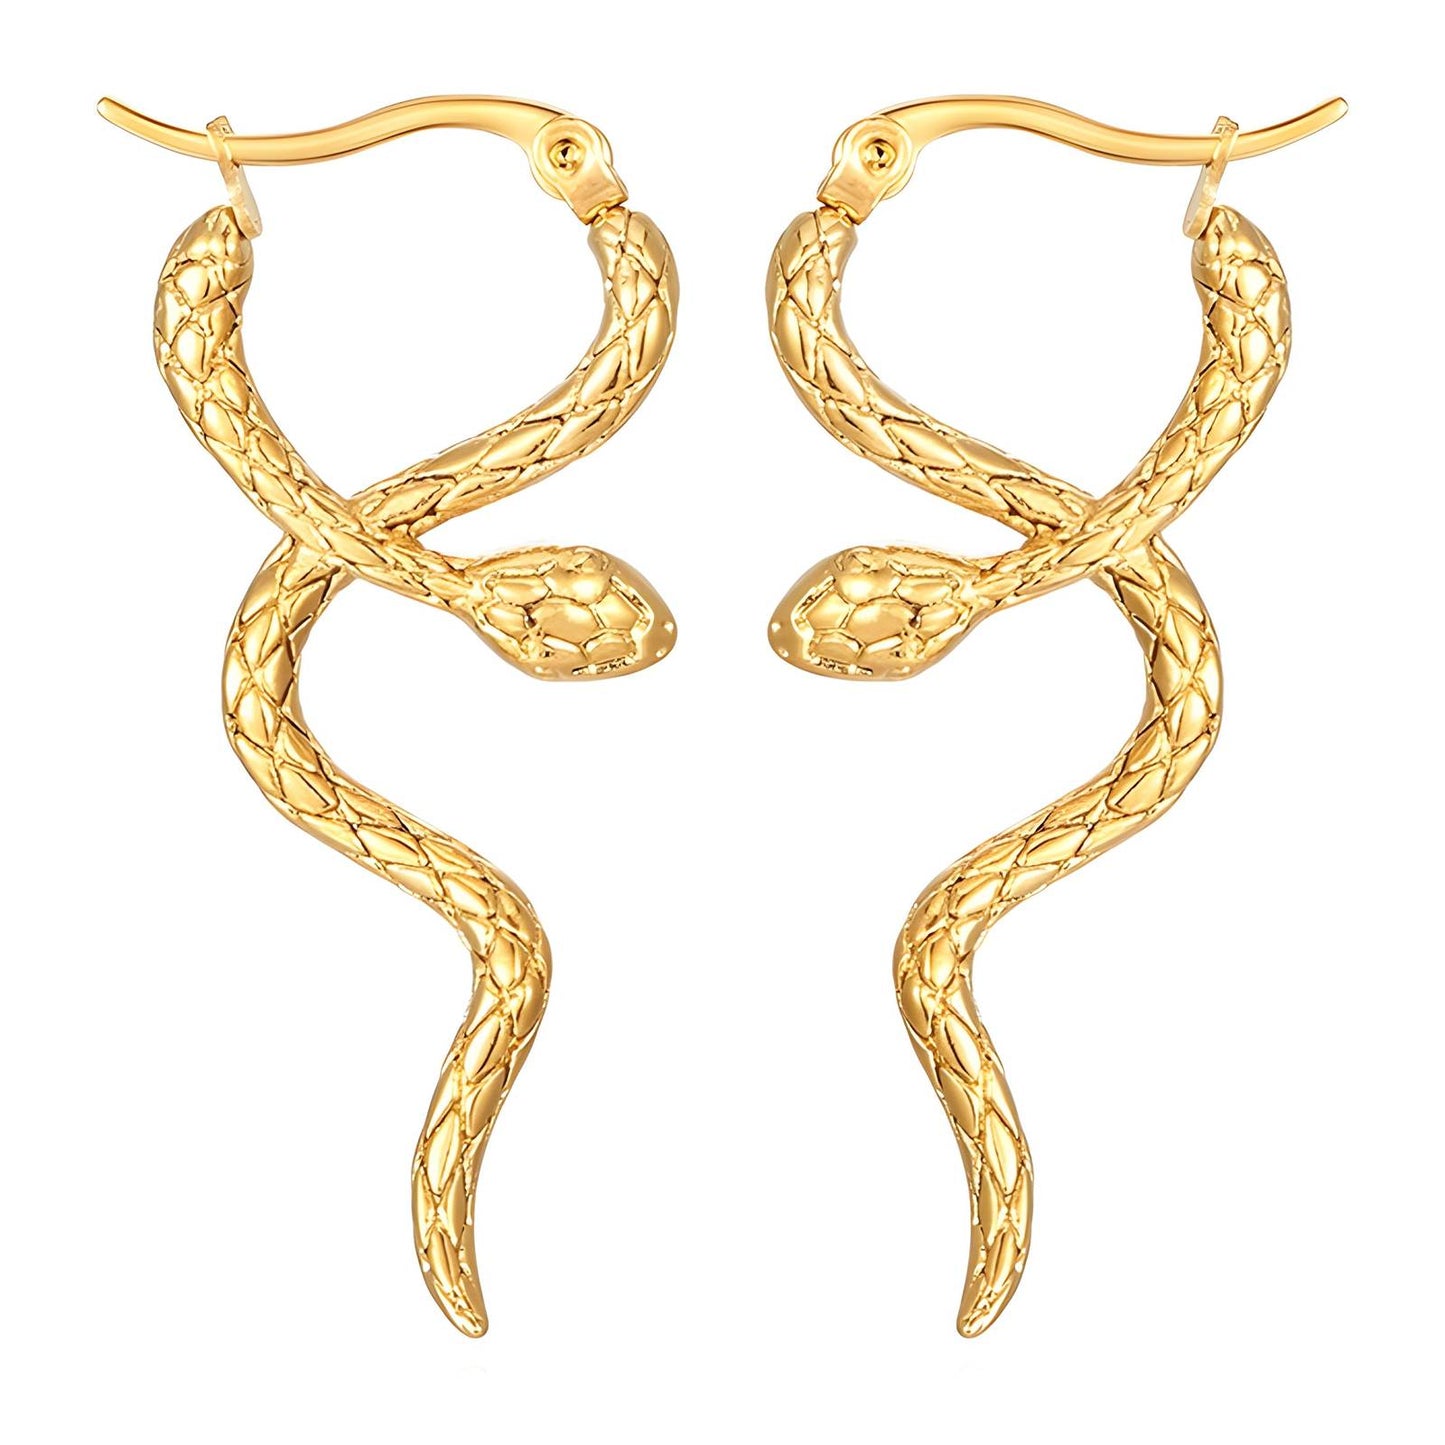 Snake Enchantment: Exquisite 18k Gold Earrings for a Captivating Look